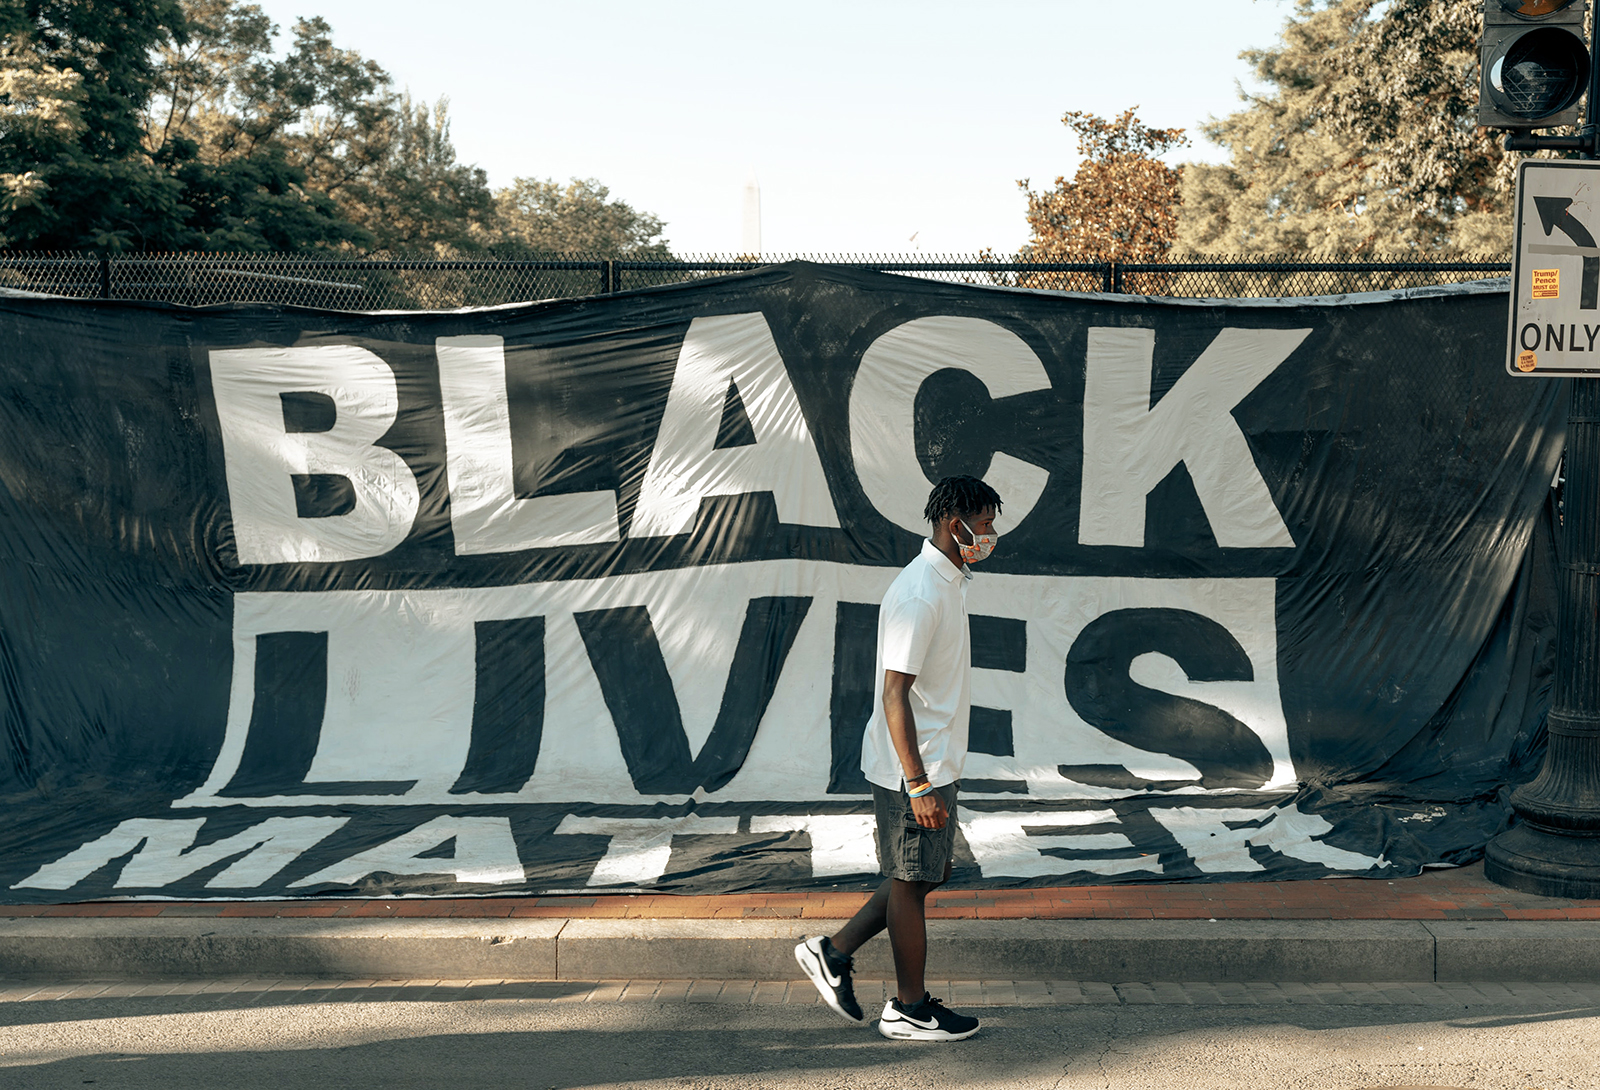 An individual passes a Black Lives Matter sign in Washington, D.C. Photo by Clay Banks/Unsplash/Creative Commons